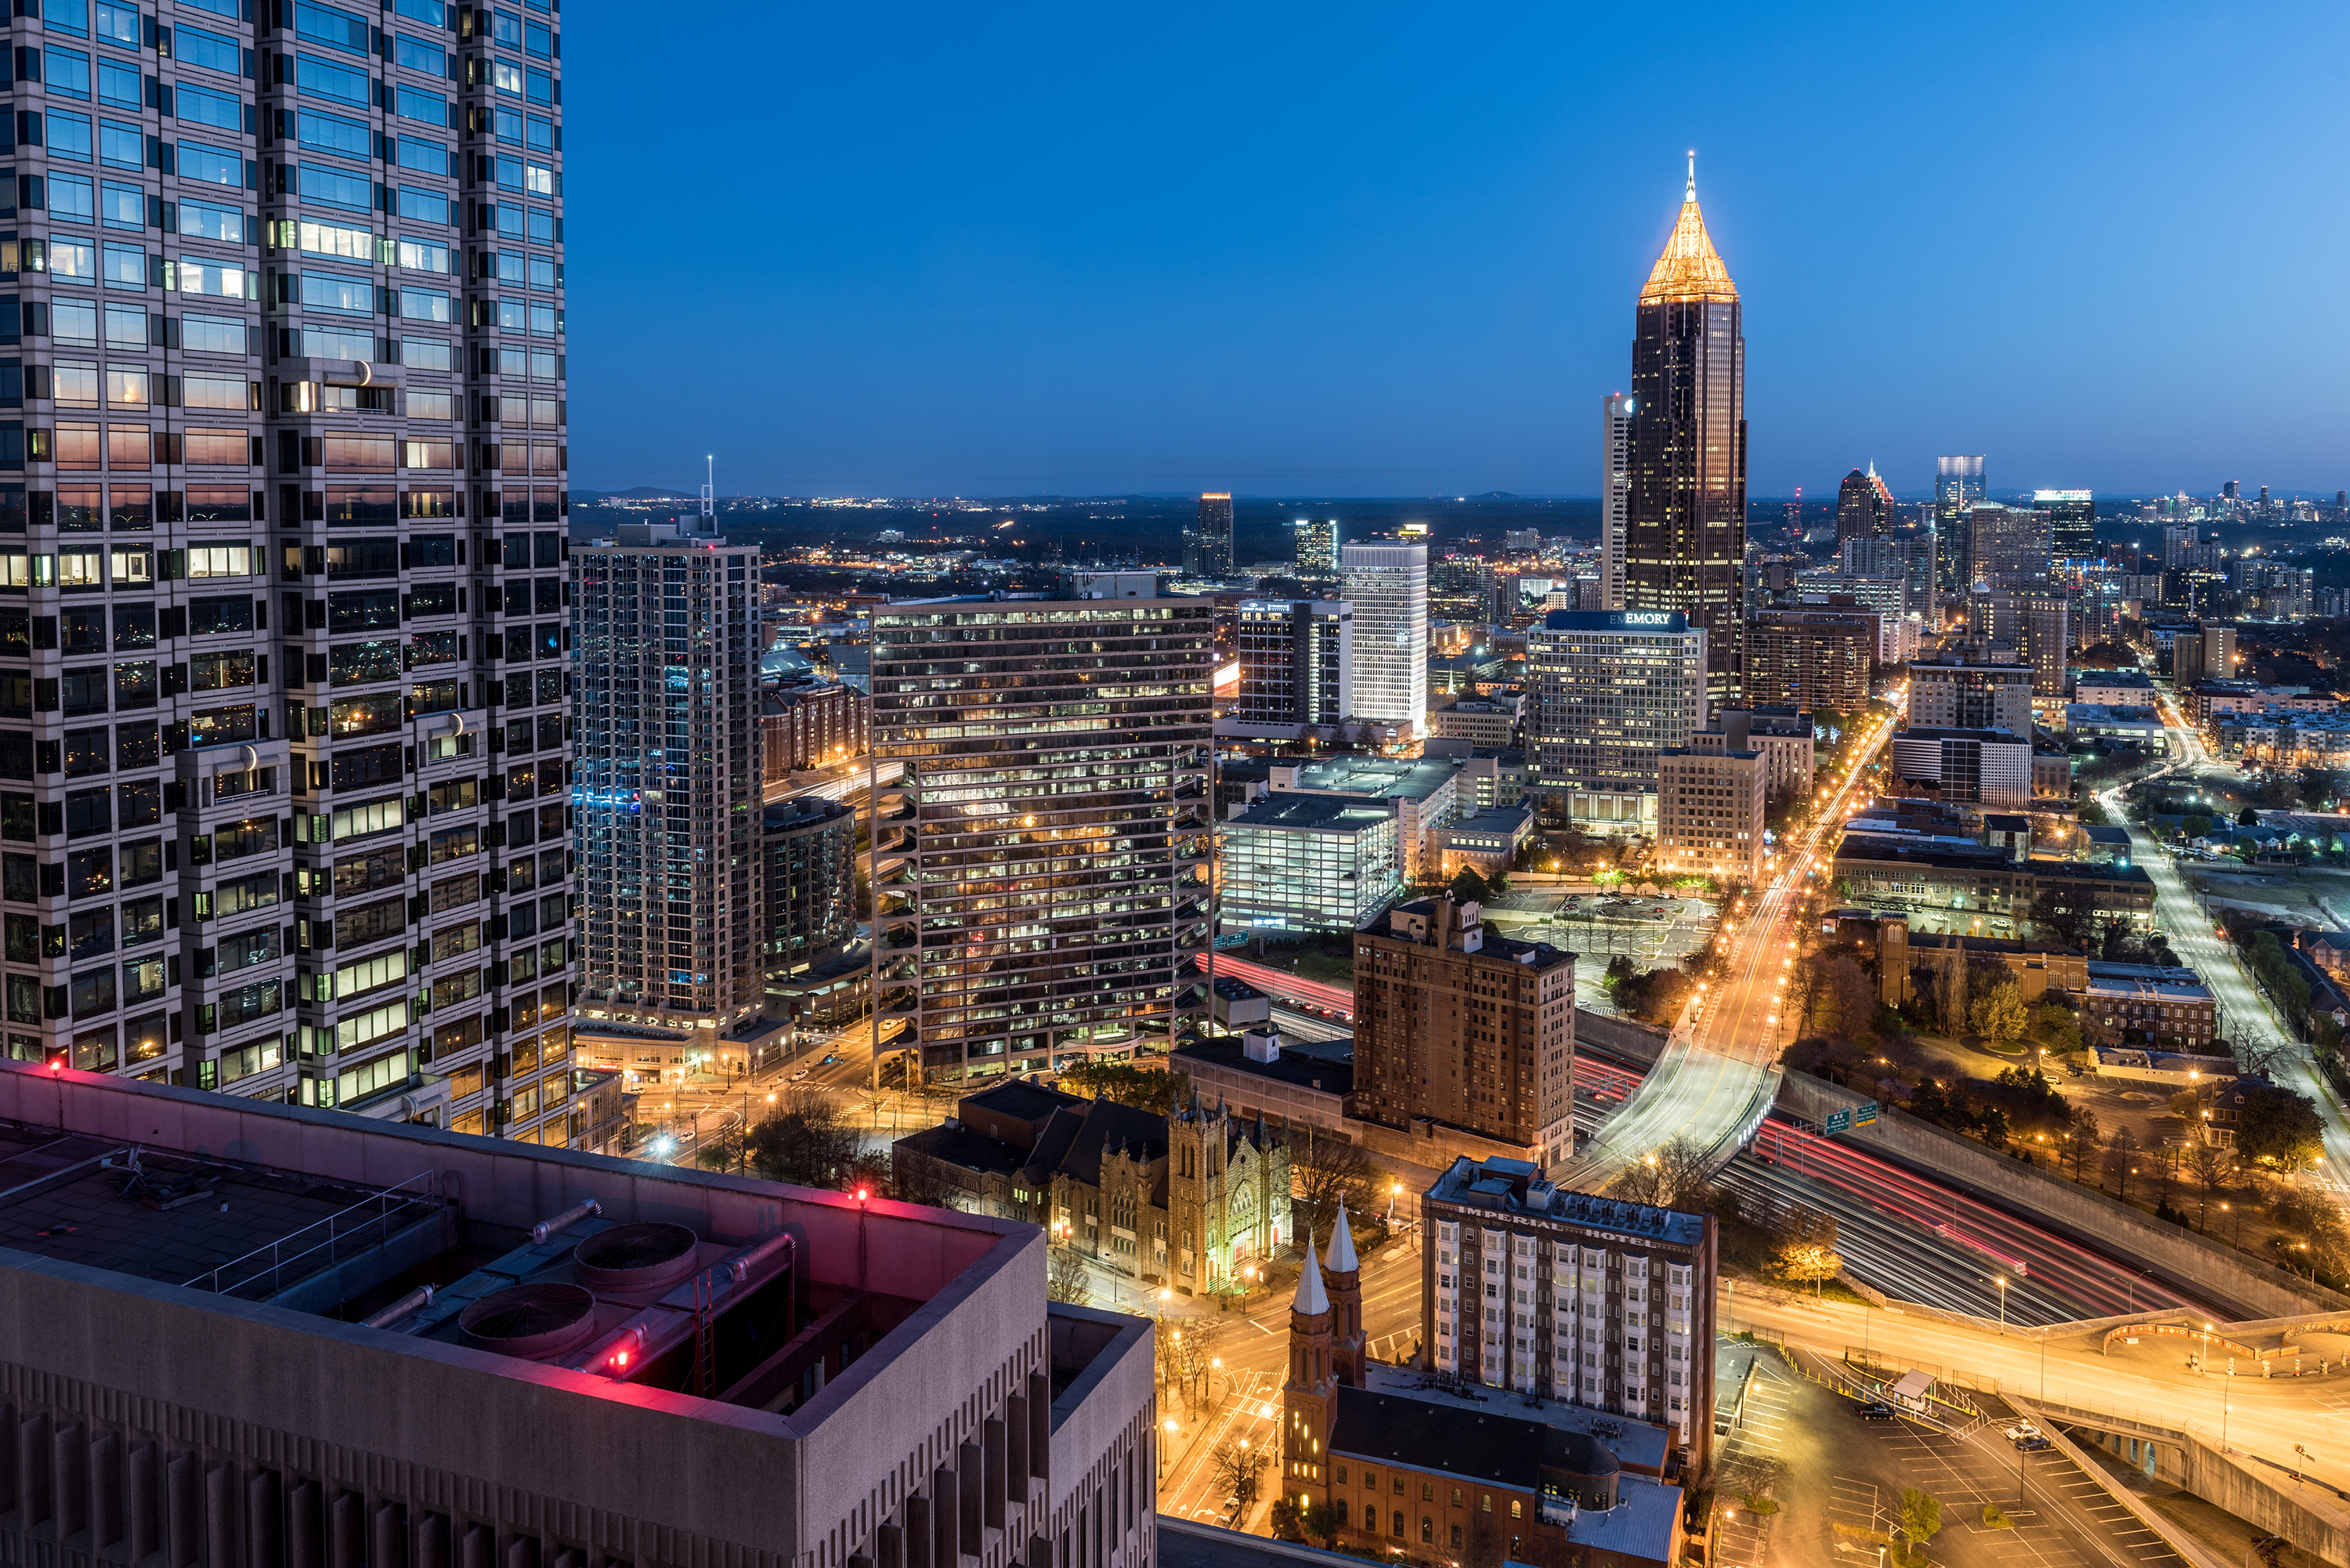 A majority of the world's people now live in urban areas, like Atlanta, creating both challenges and opportunities for "Smart Cities." (Credit: Rob Felt, Georgia Tech)